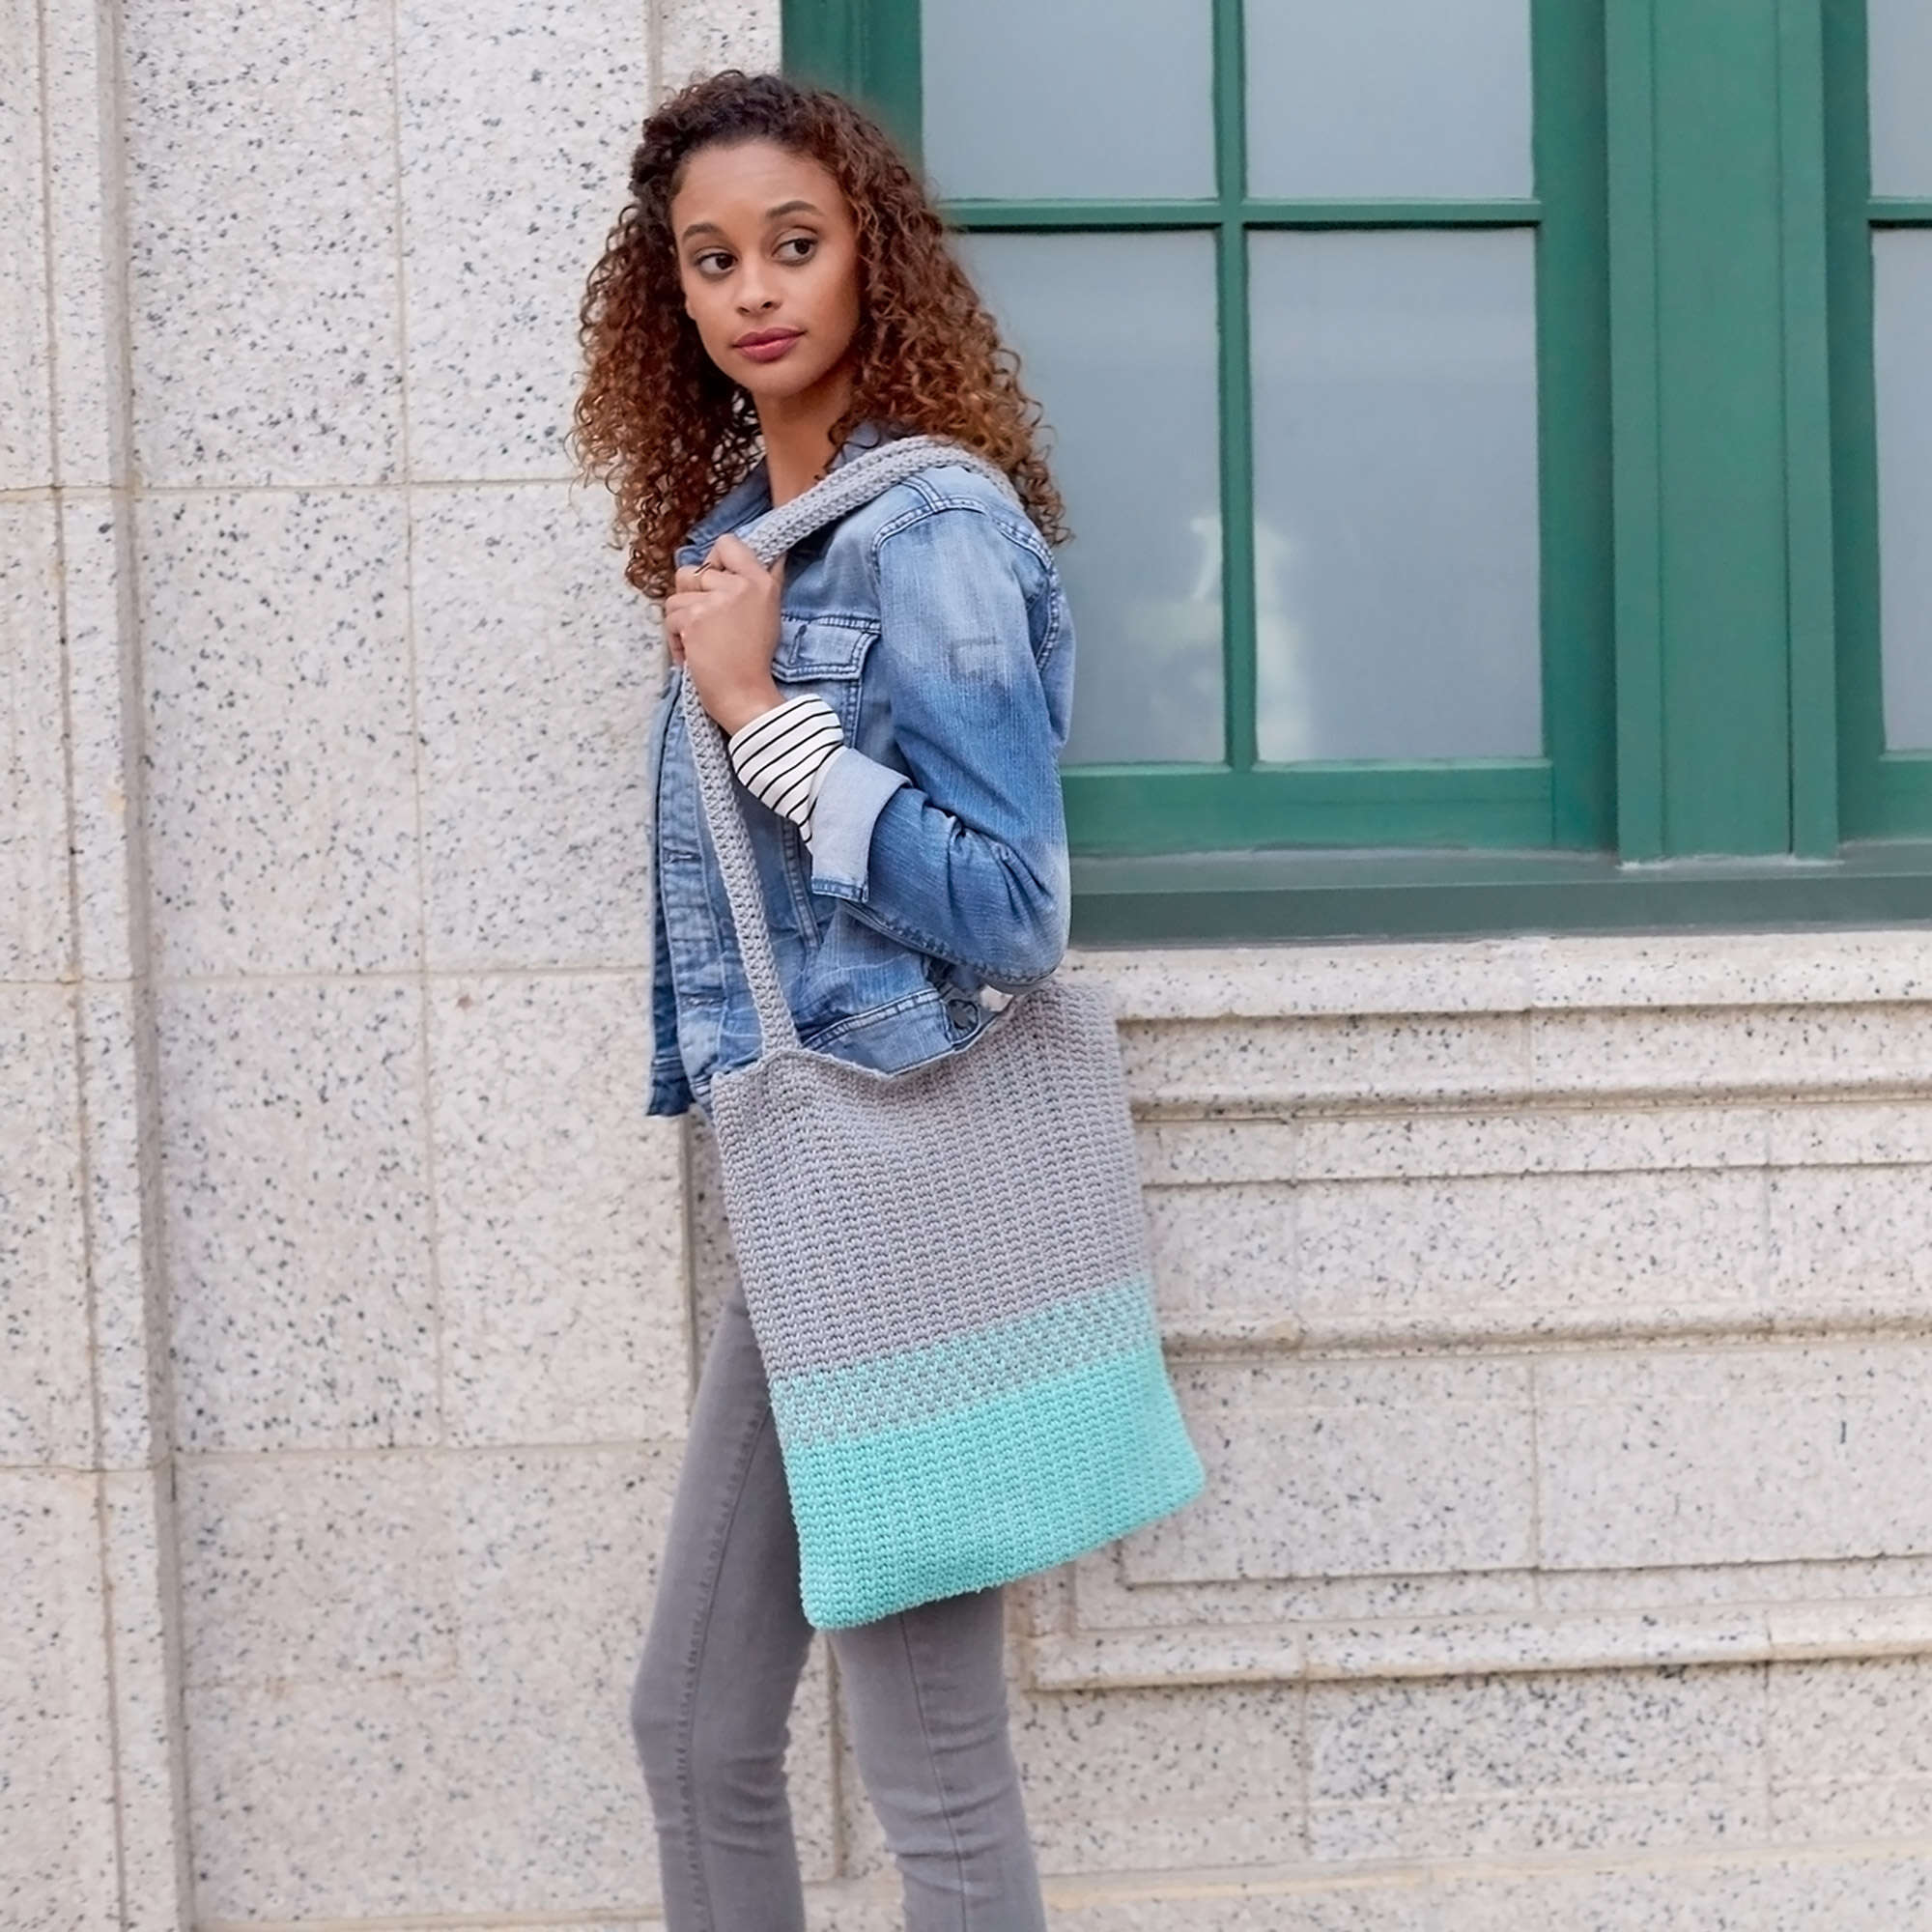 How to Make a Simple Crochet Bag + Free Pattern & Tutorial